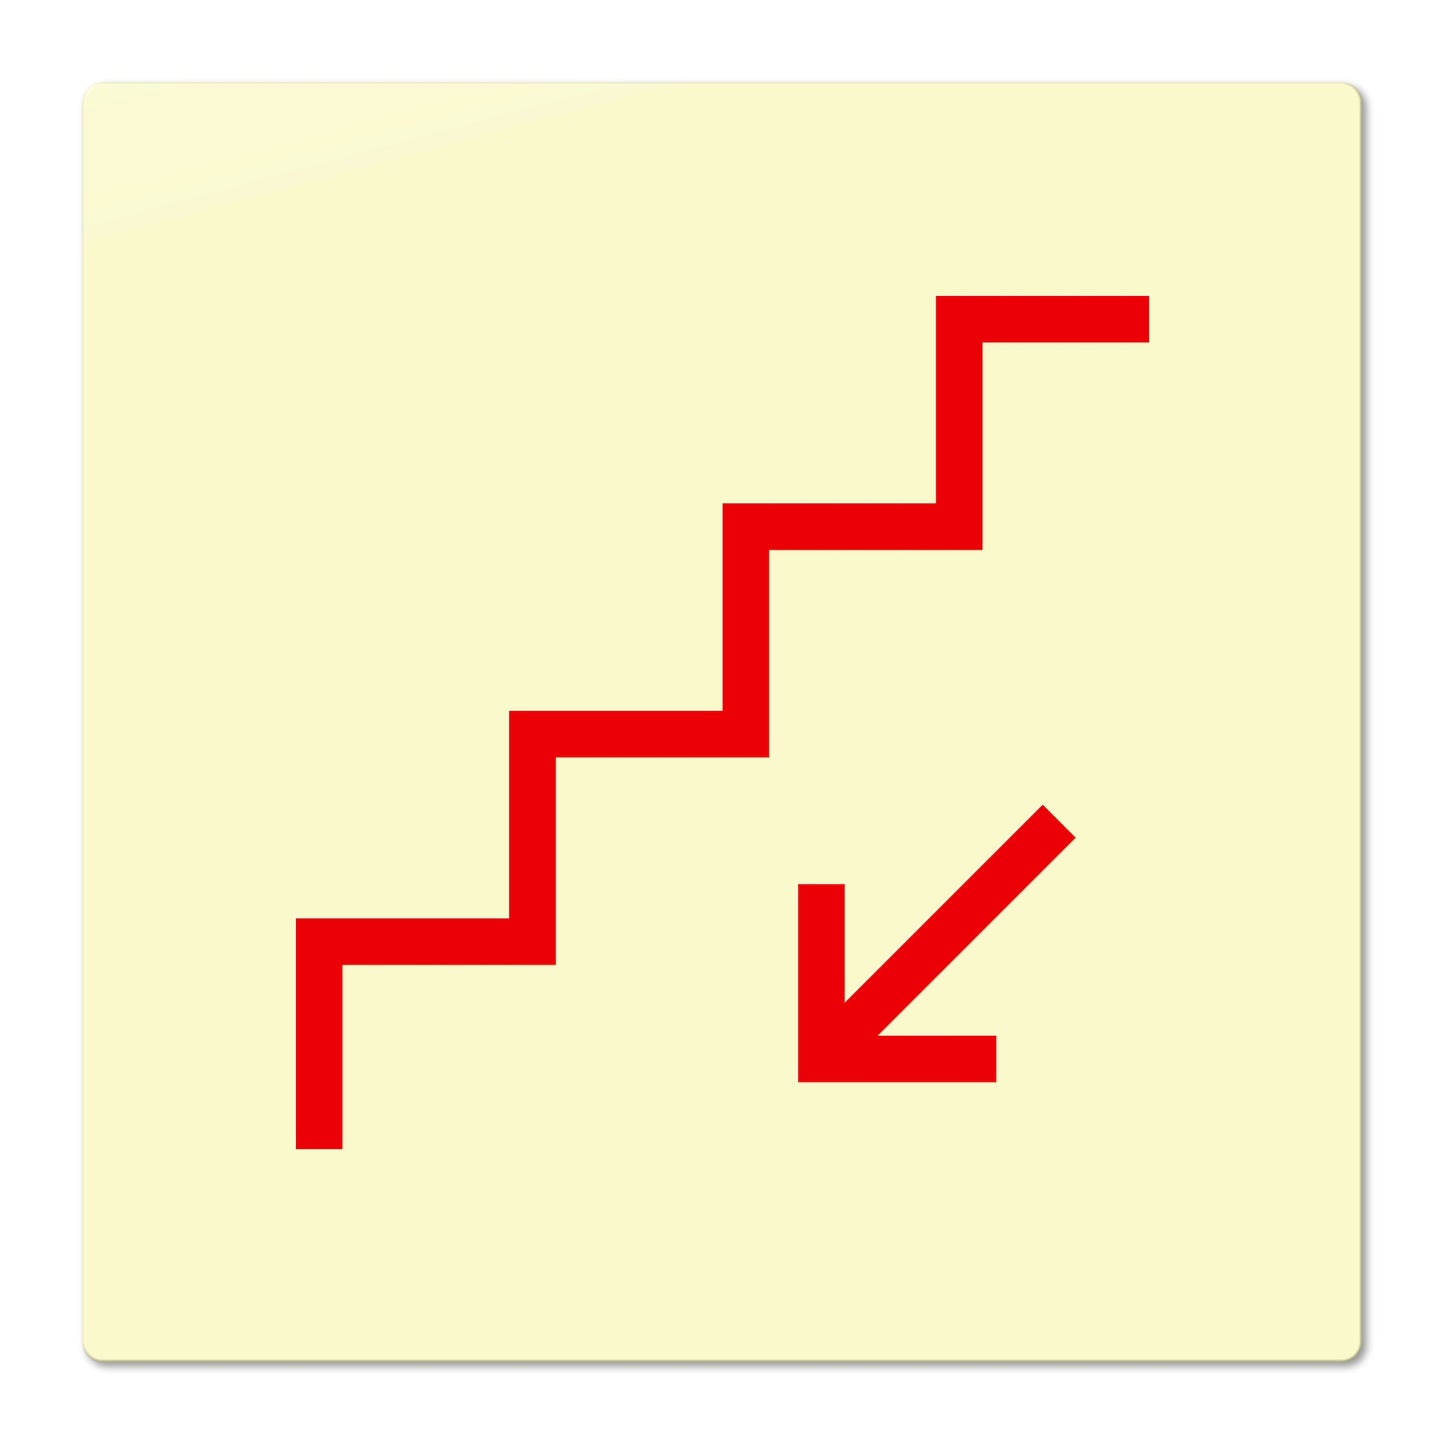 Down Stairs (Pictogram)